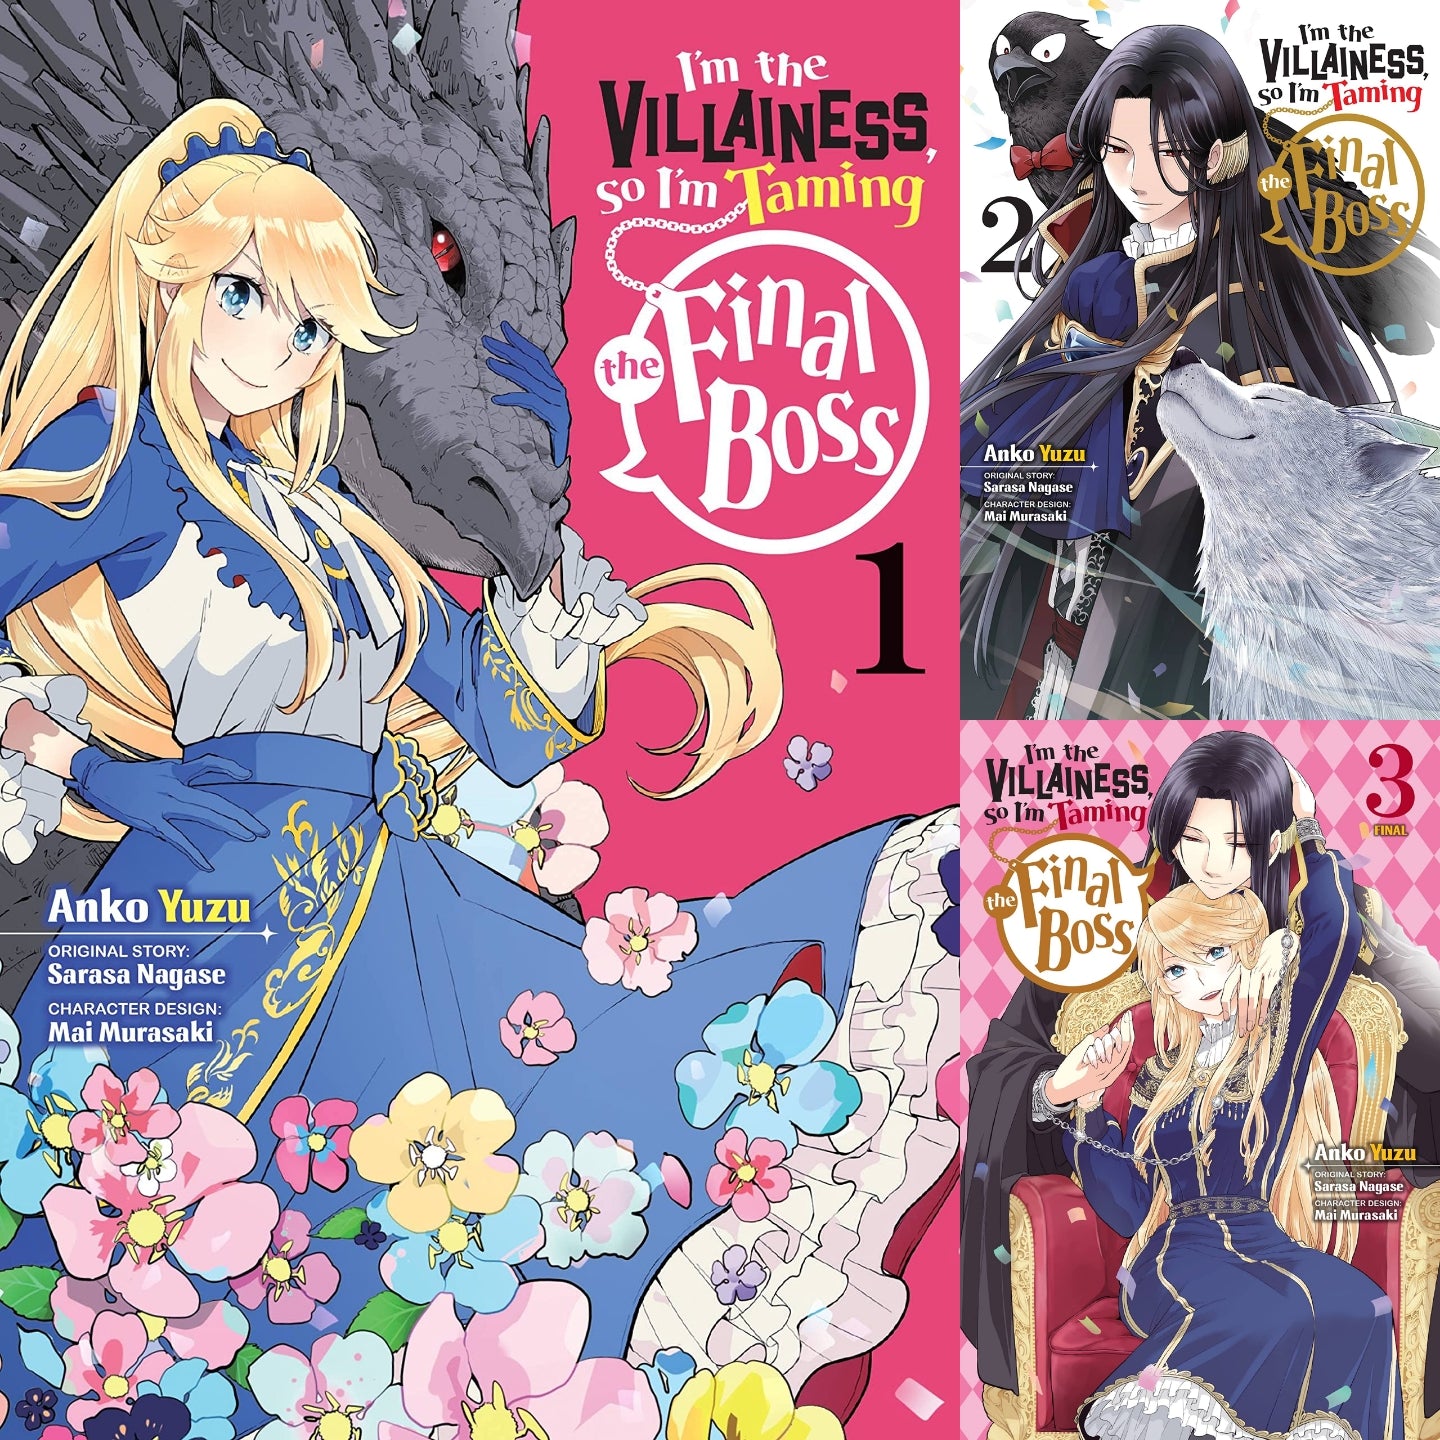 I'm the Villainess, So I'm Taming the Final Boss (Manga) Complete Set